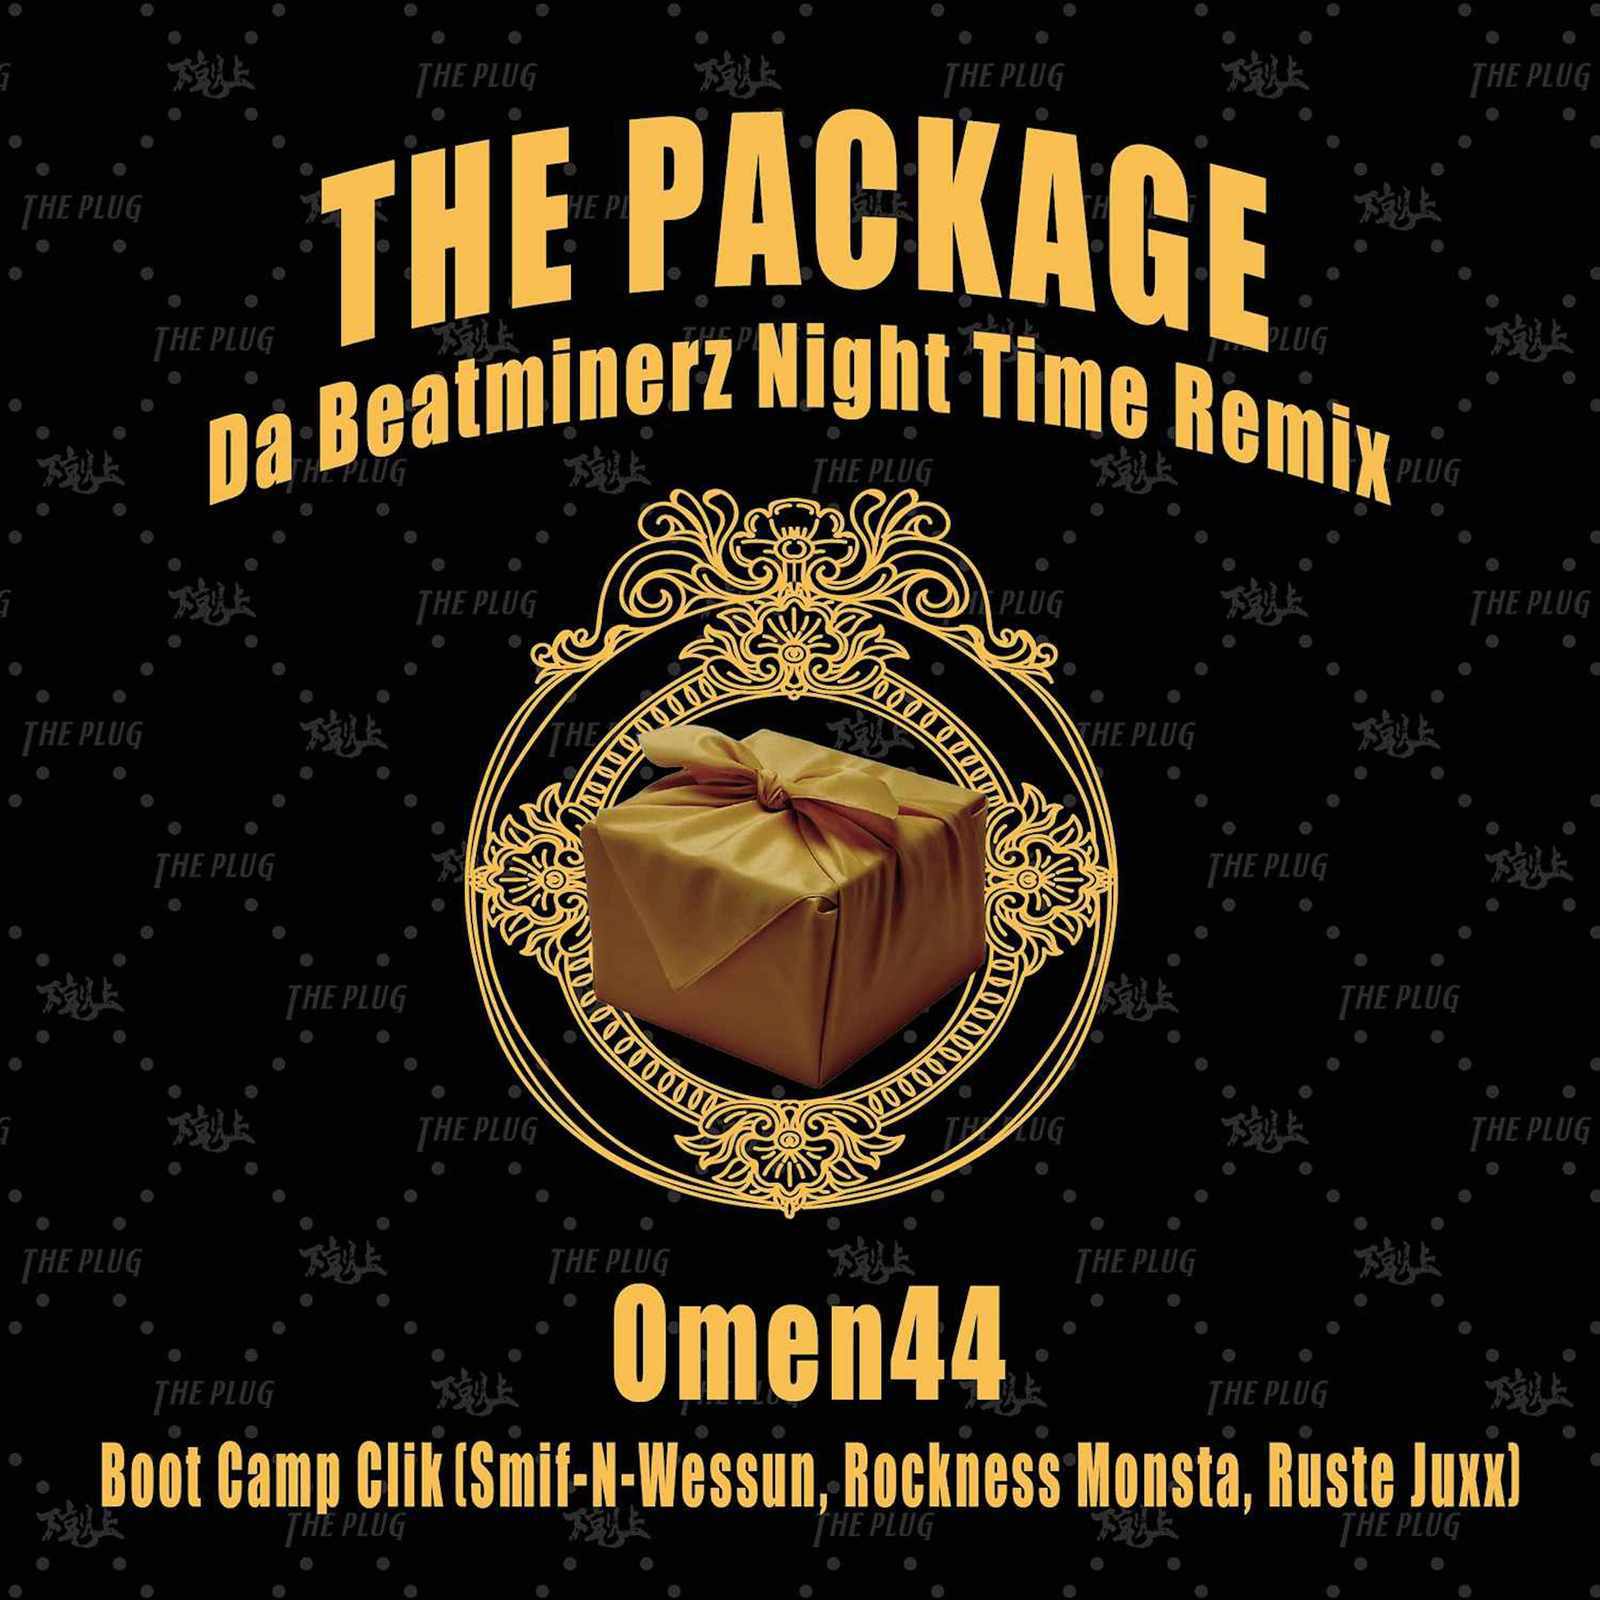 Omen44 - The Package (Night Time Remix)